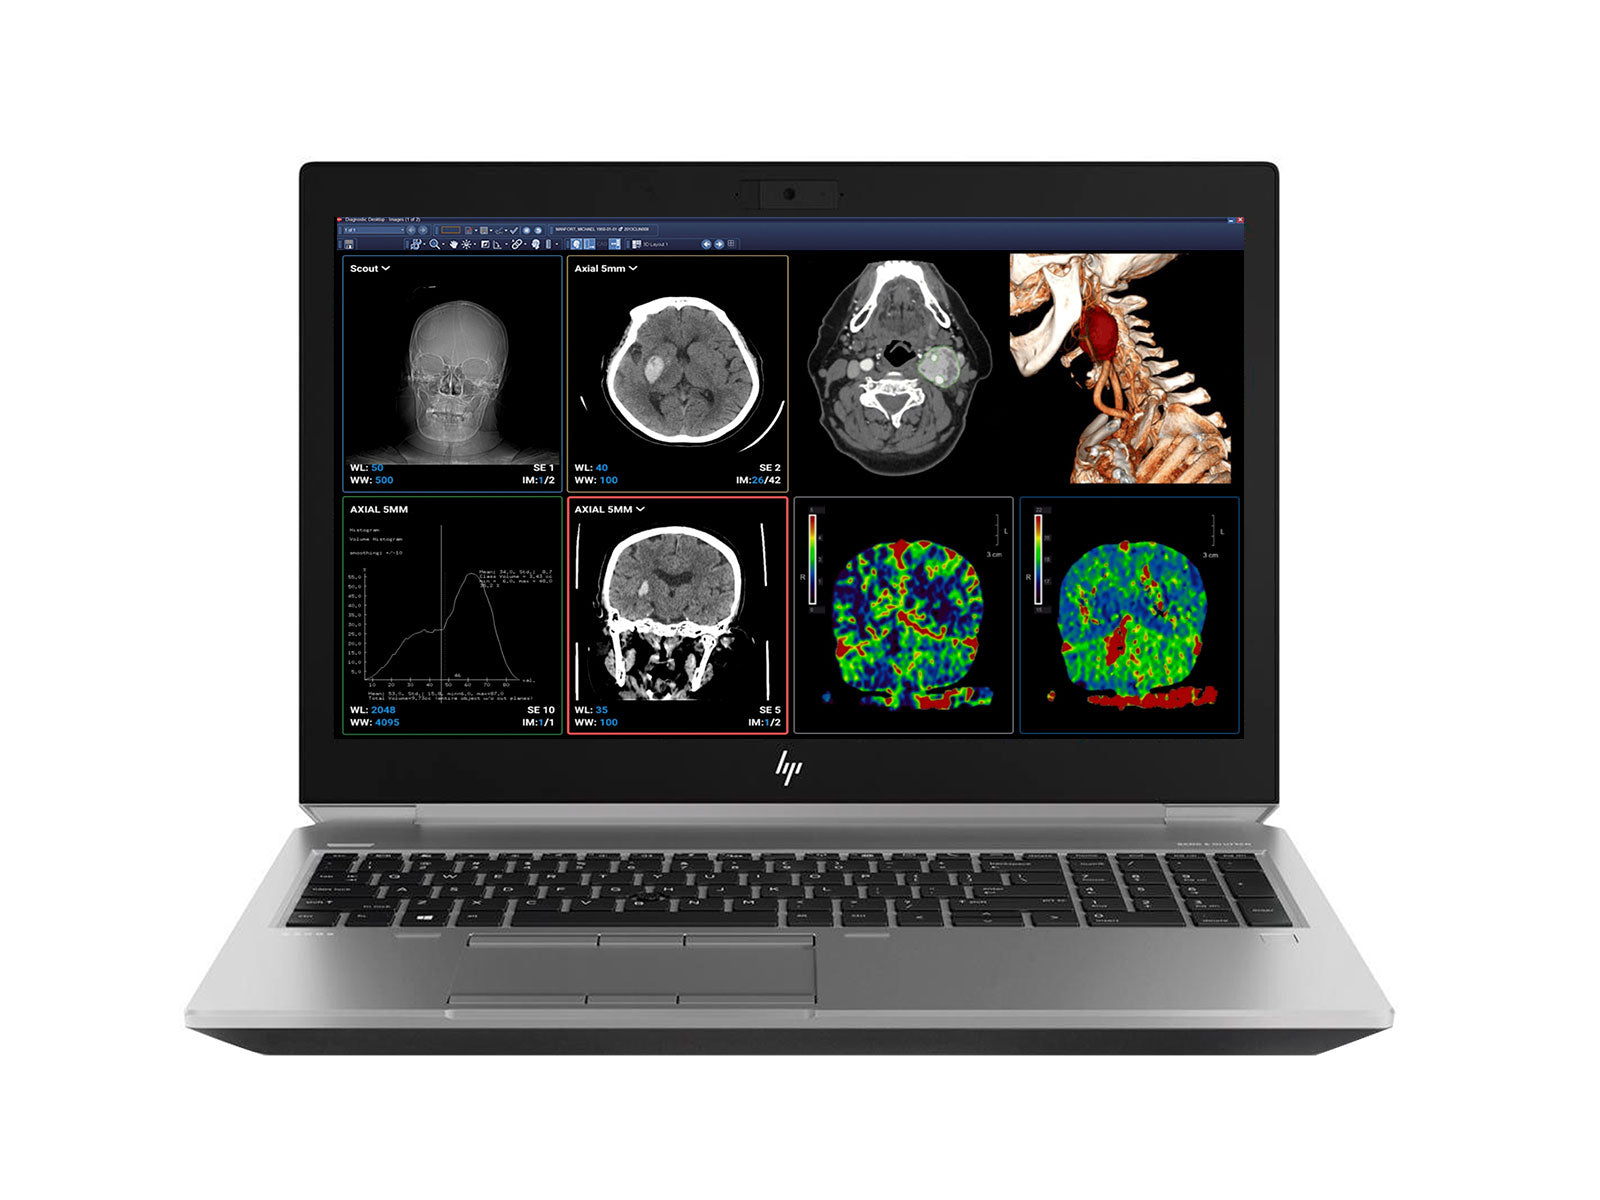 HP ZBook Fury 15 G6 Mobile Radiology Workstation | 15.6" Full HD LED | Intel i7-9750H @ 4.50GHz | 6-Core | 32GB DDR4 | 512GB NVMe SSD | NVIDIA Quadro T1000 4GB | Win10 Pro